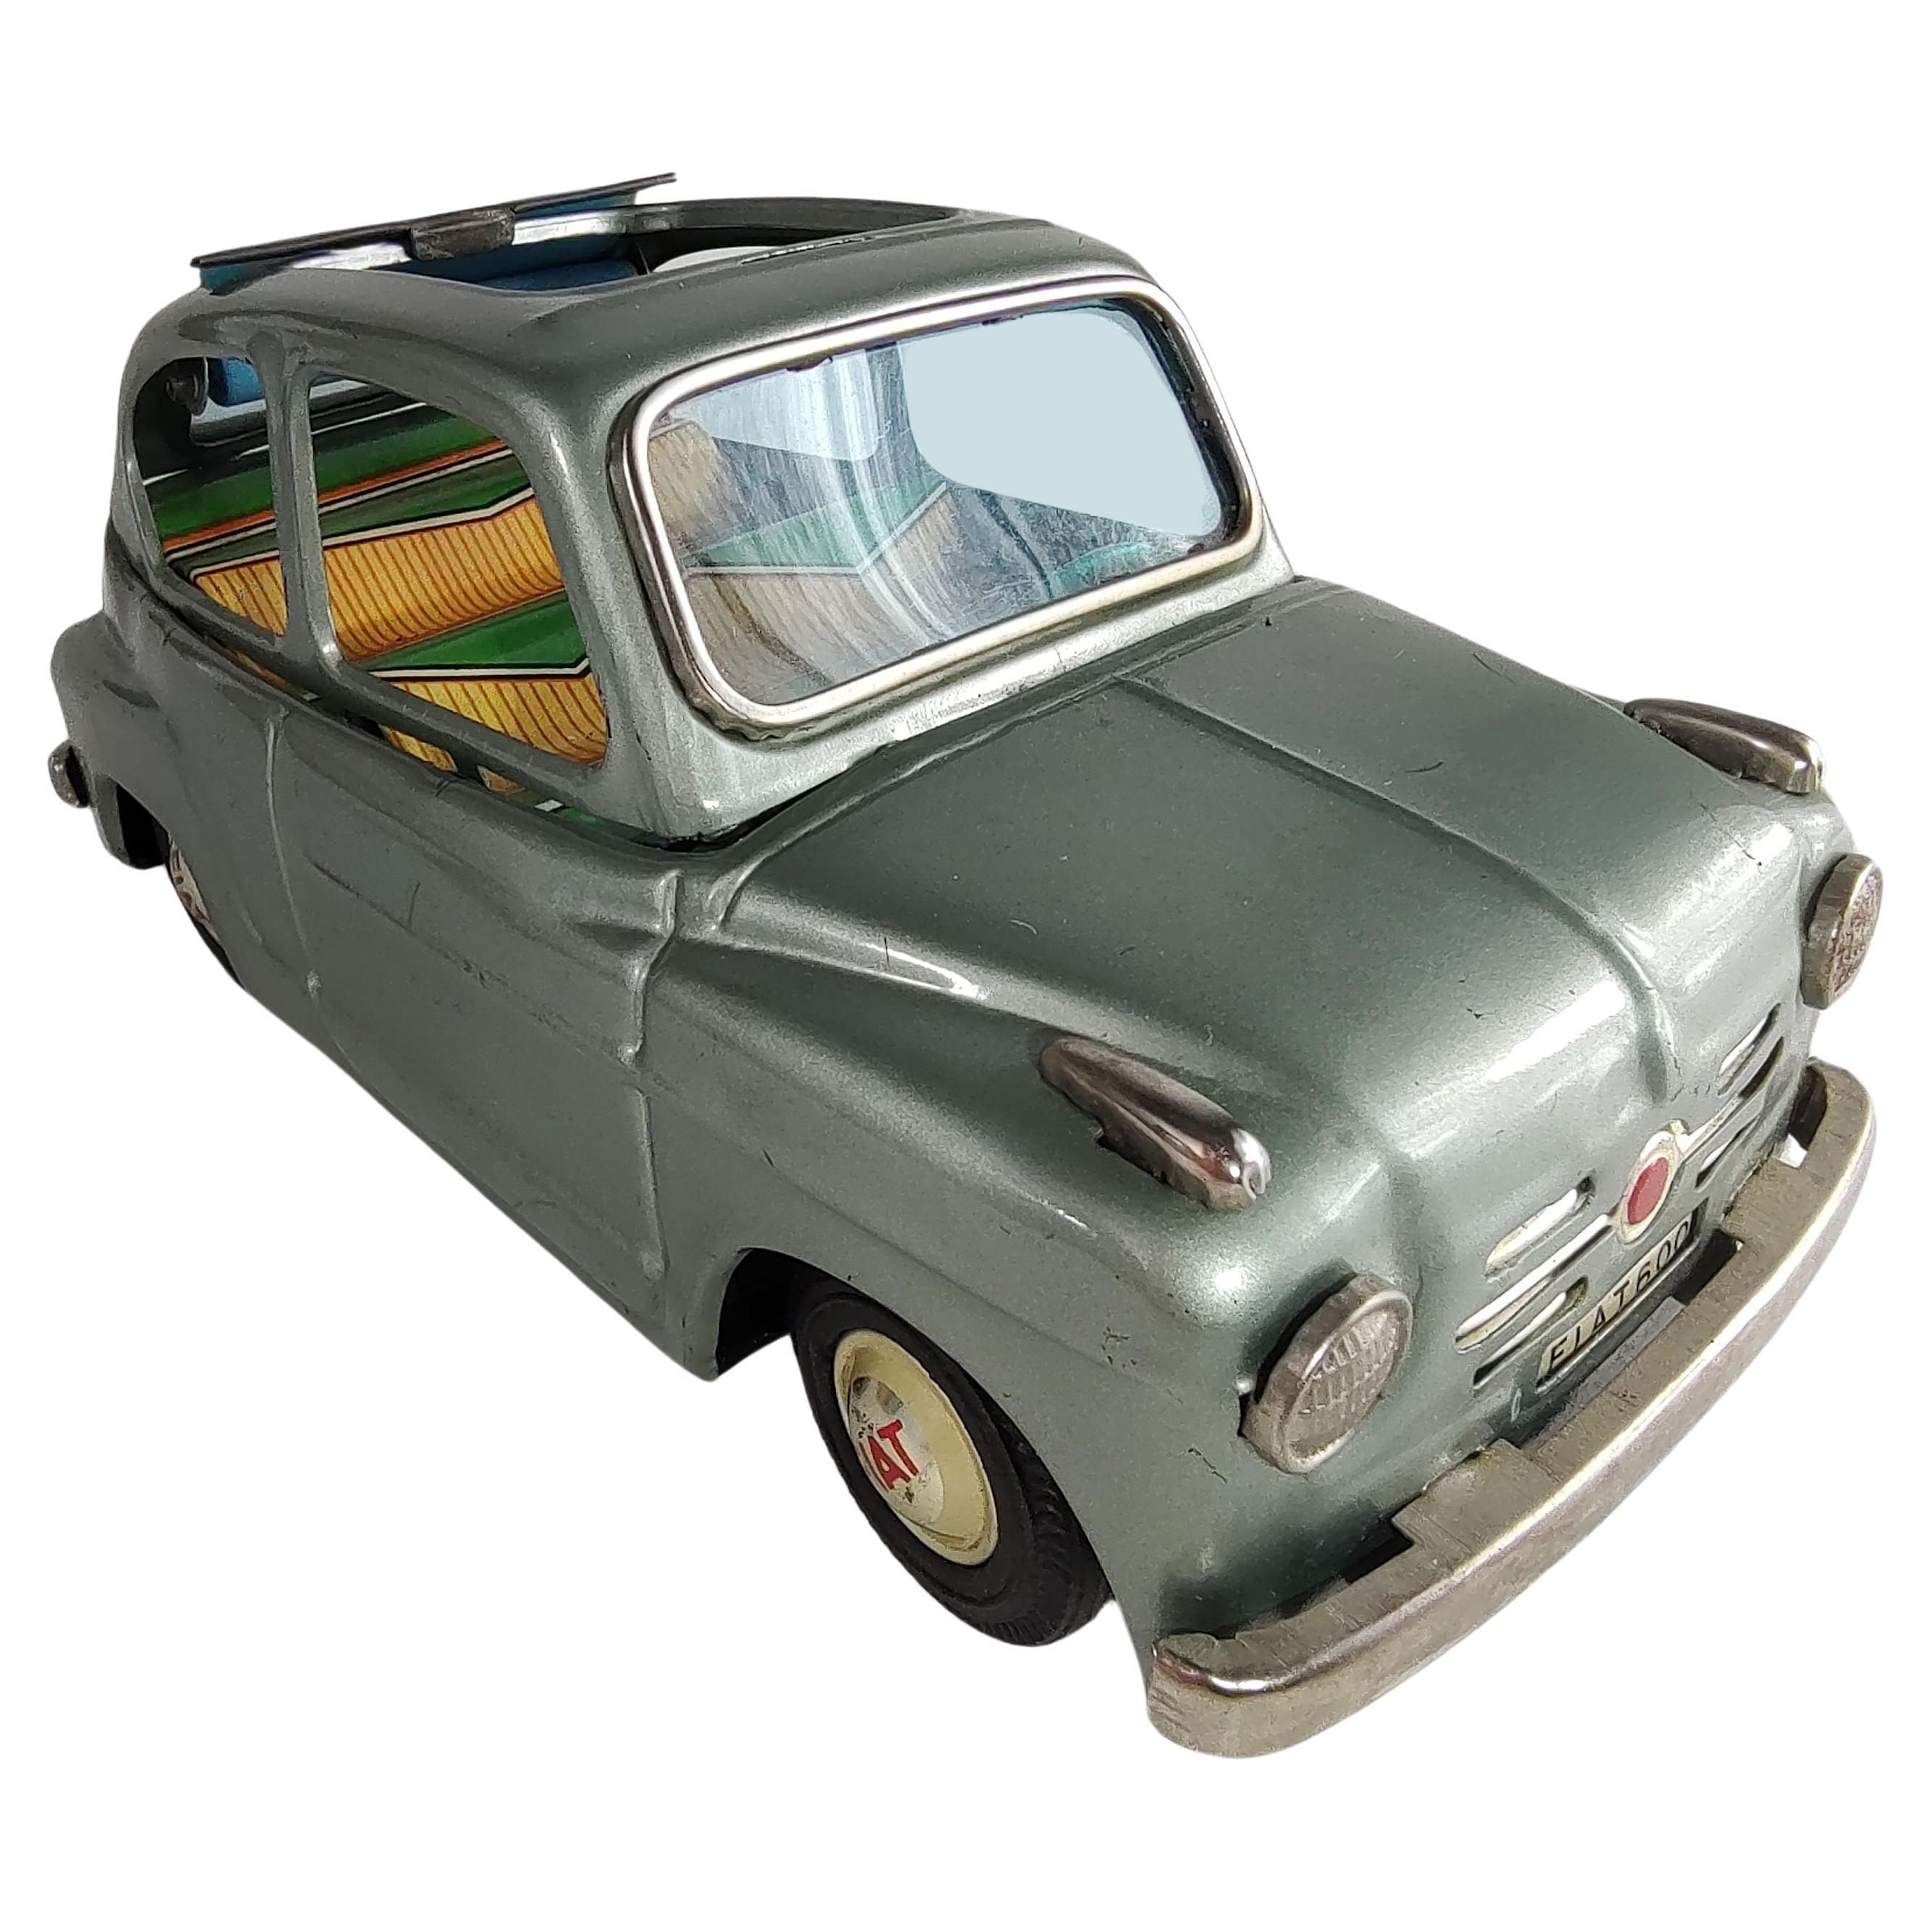 Midcentury Friction Tin Litho Soft Top Toy Car Fiat 600 by Bandai Japan For Sale